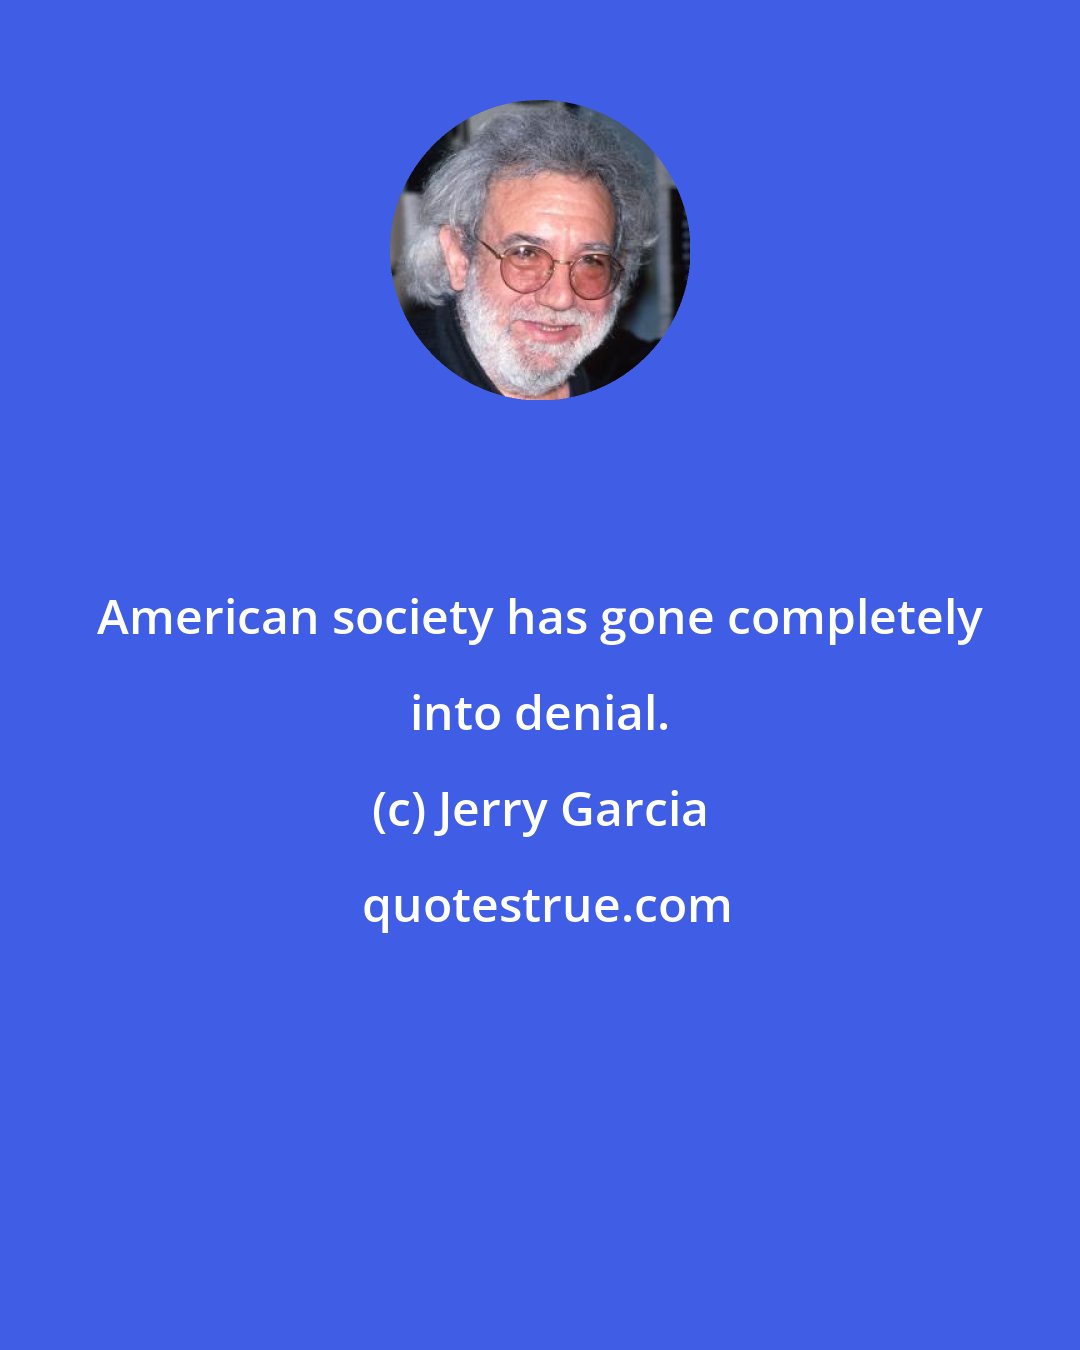 Jerry Garcia: American society has gone completely into denial.